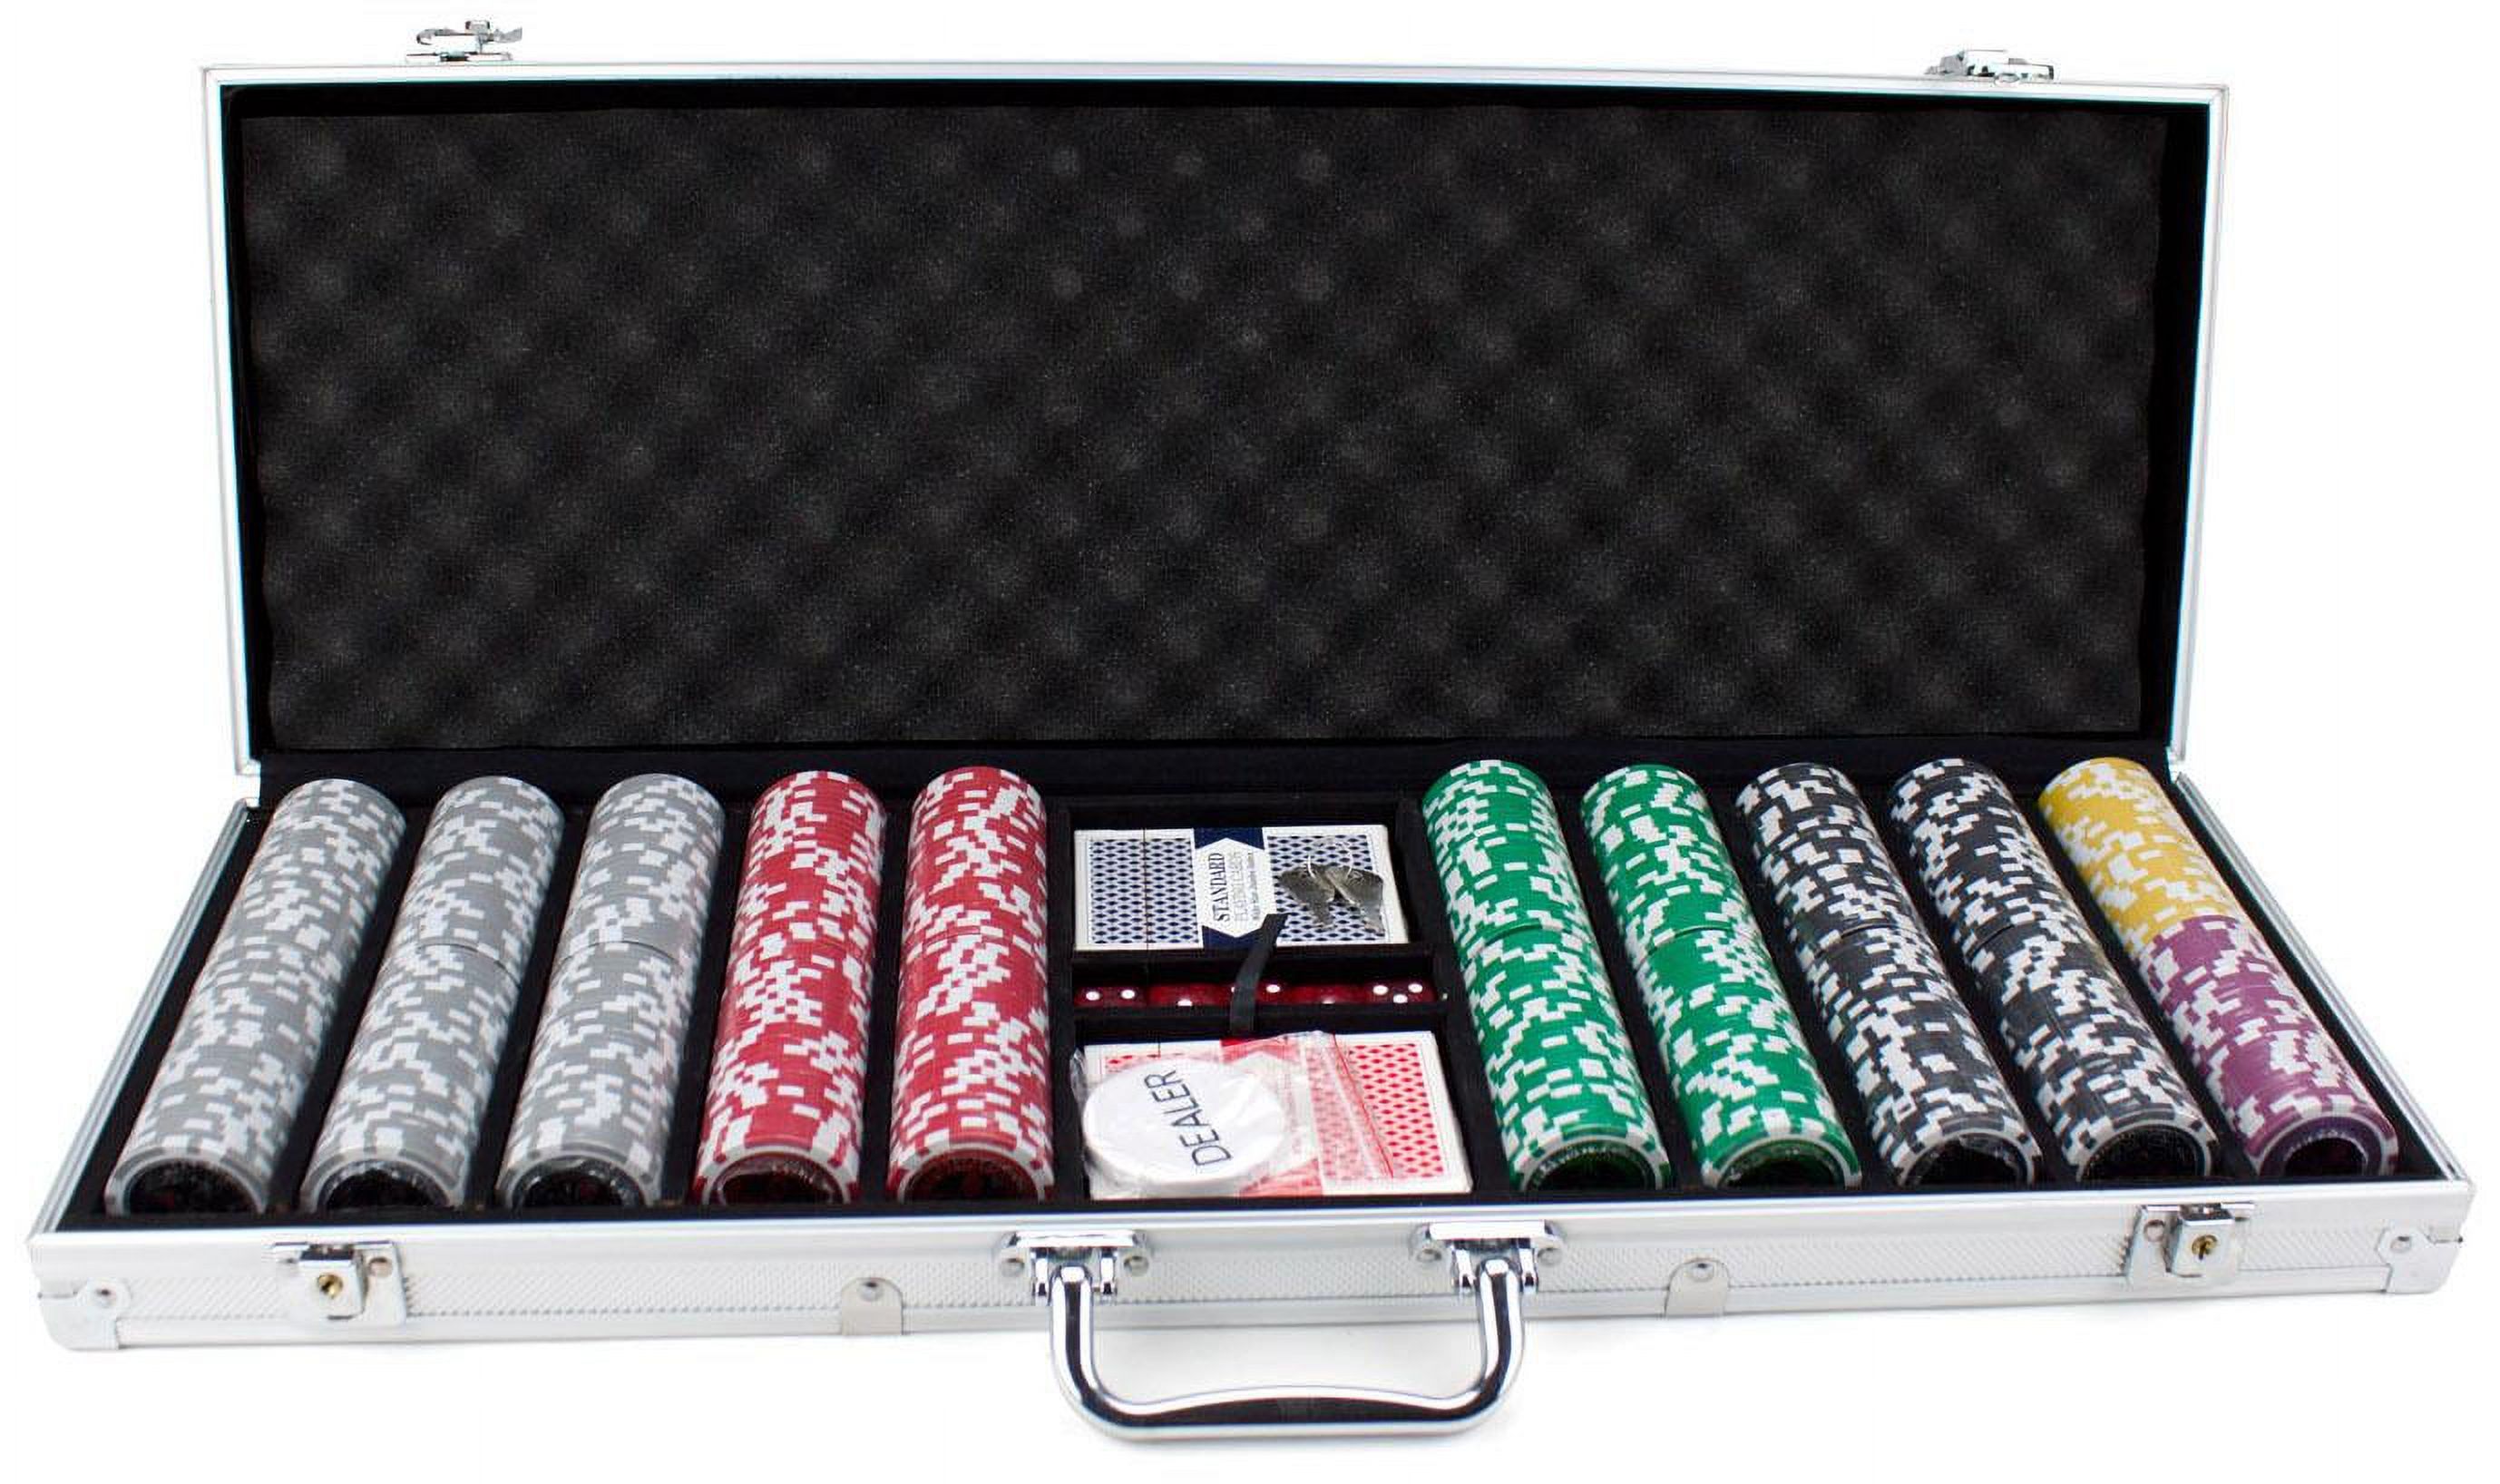 500ct. Ultimate 14g Poker Chip Set in Aluminum Metal Carry Case - image 1 of 3